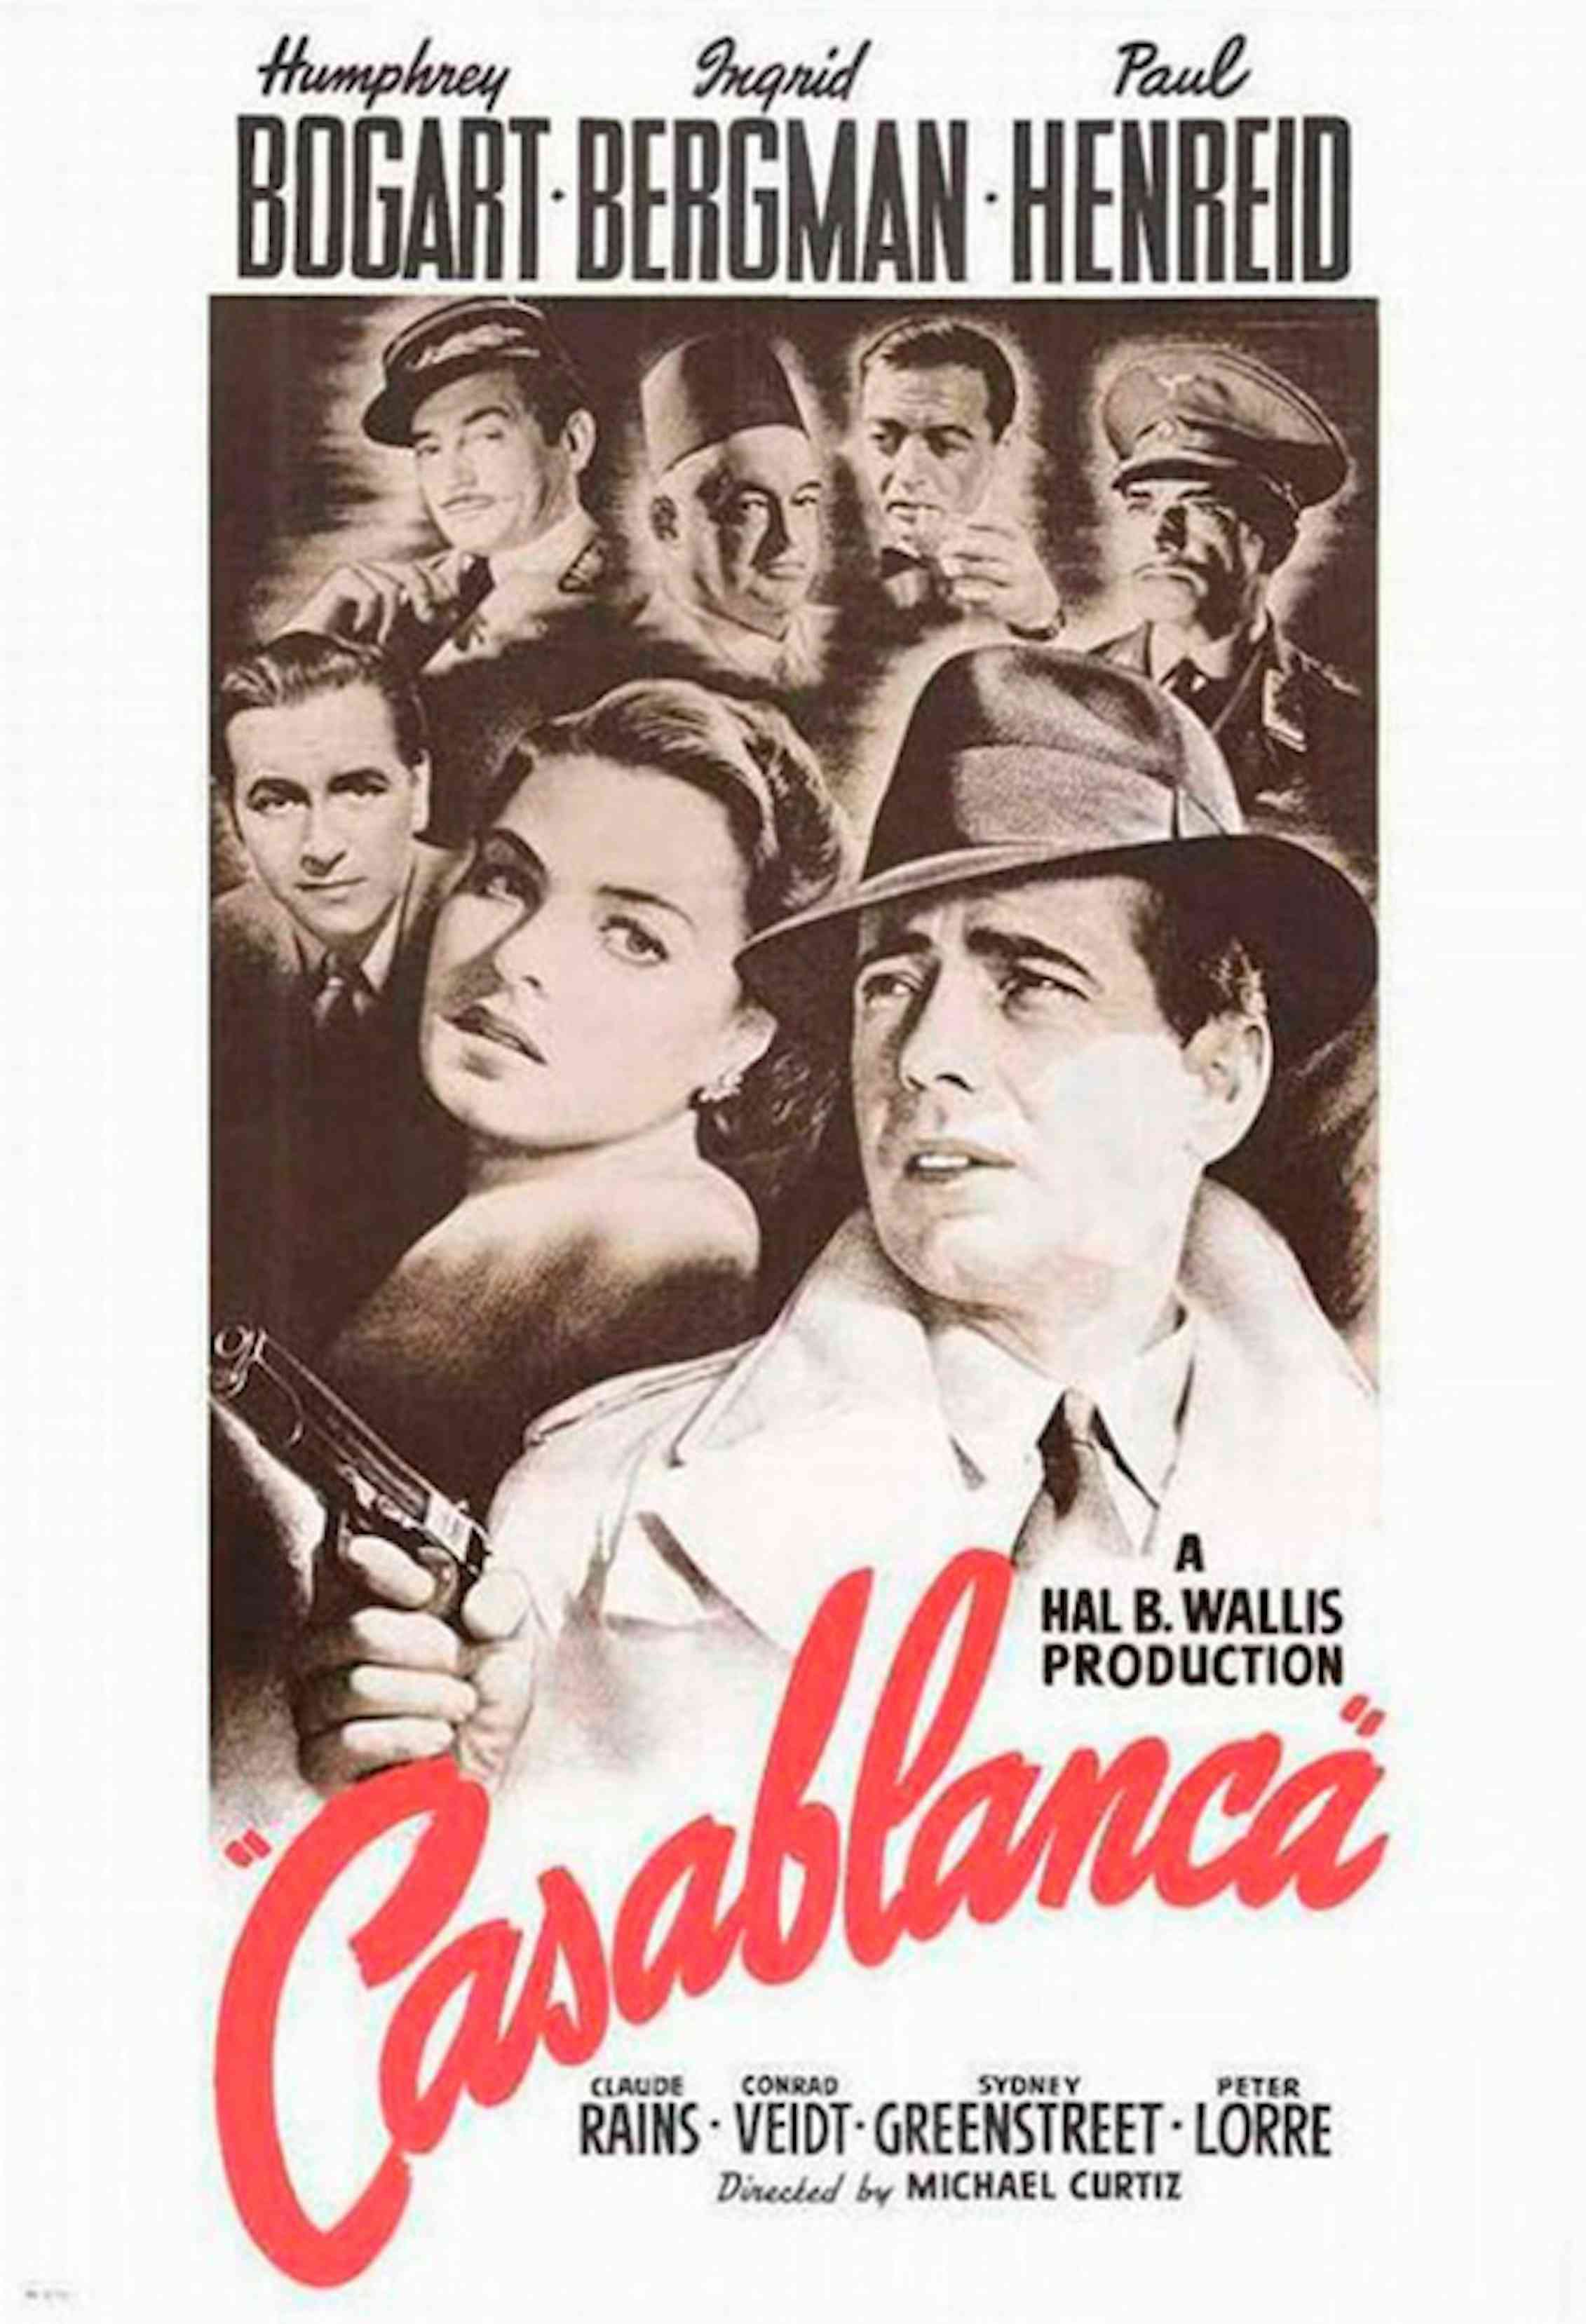 You must remember this: Casablanca at 75 – still a classic of WWII